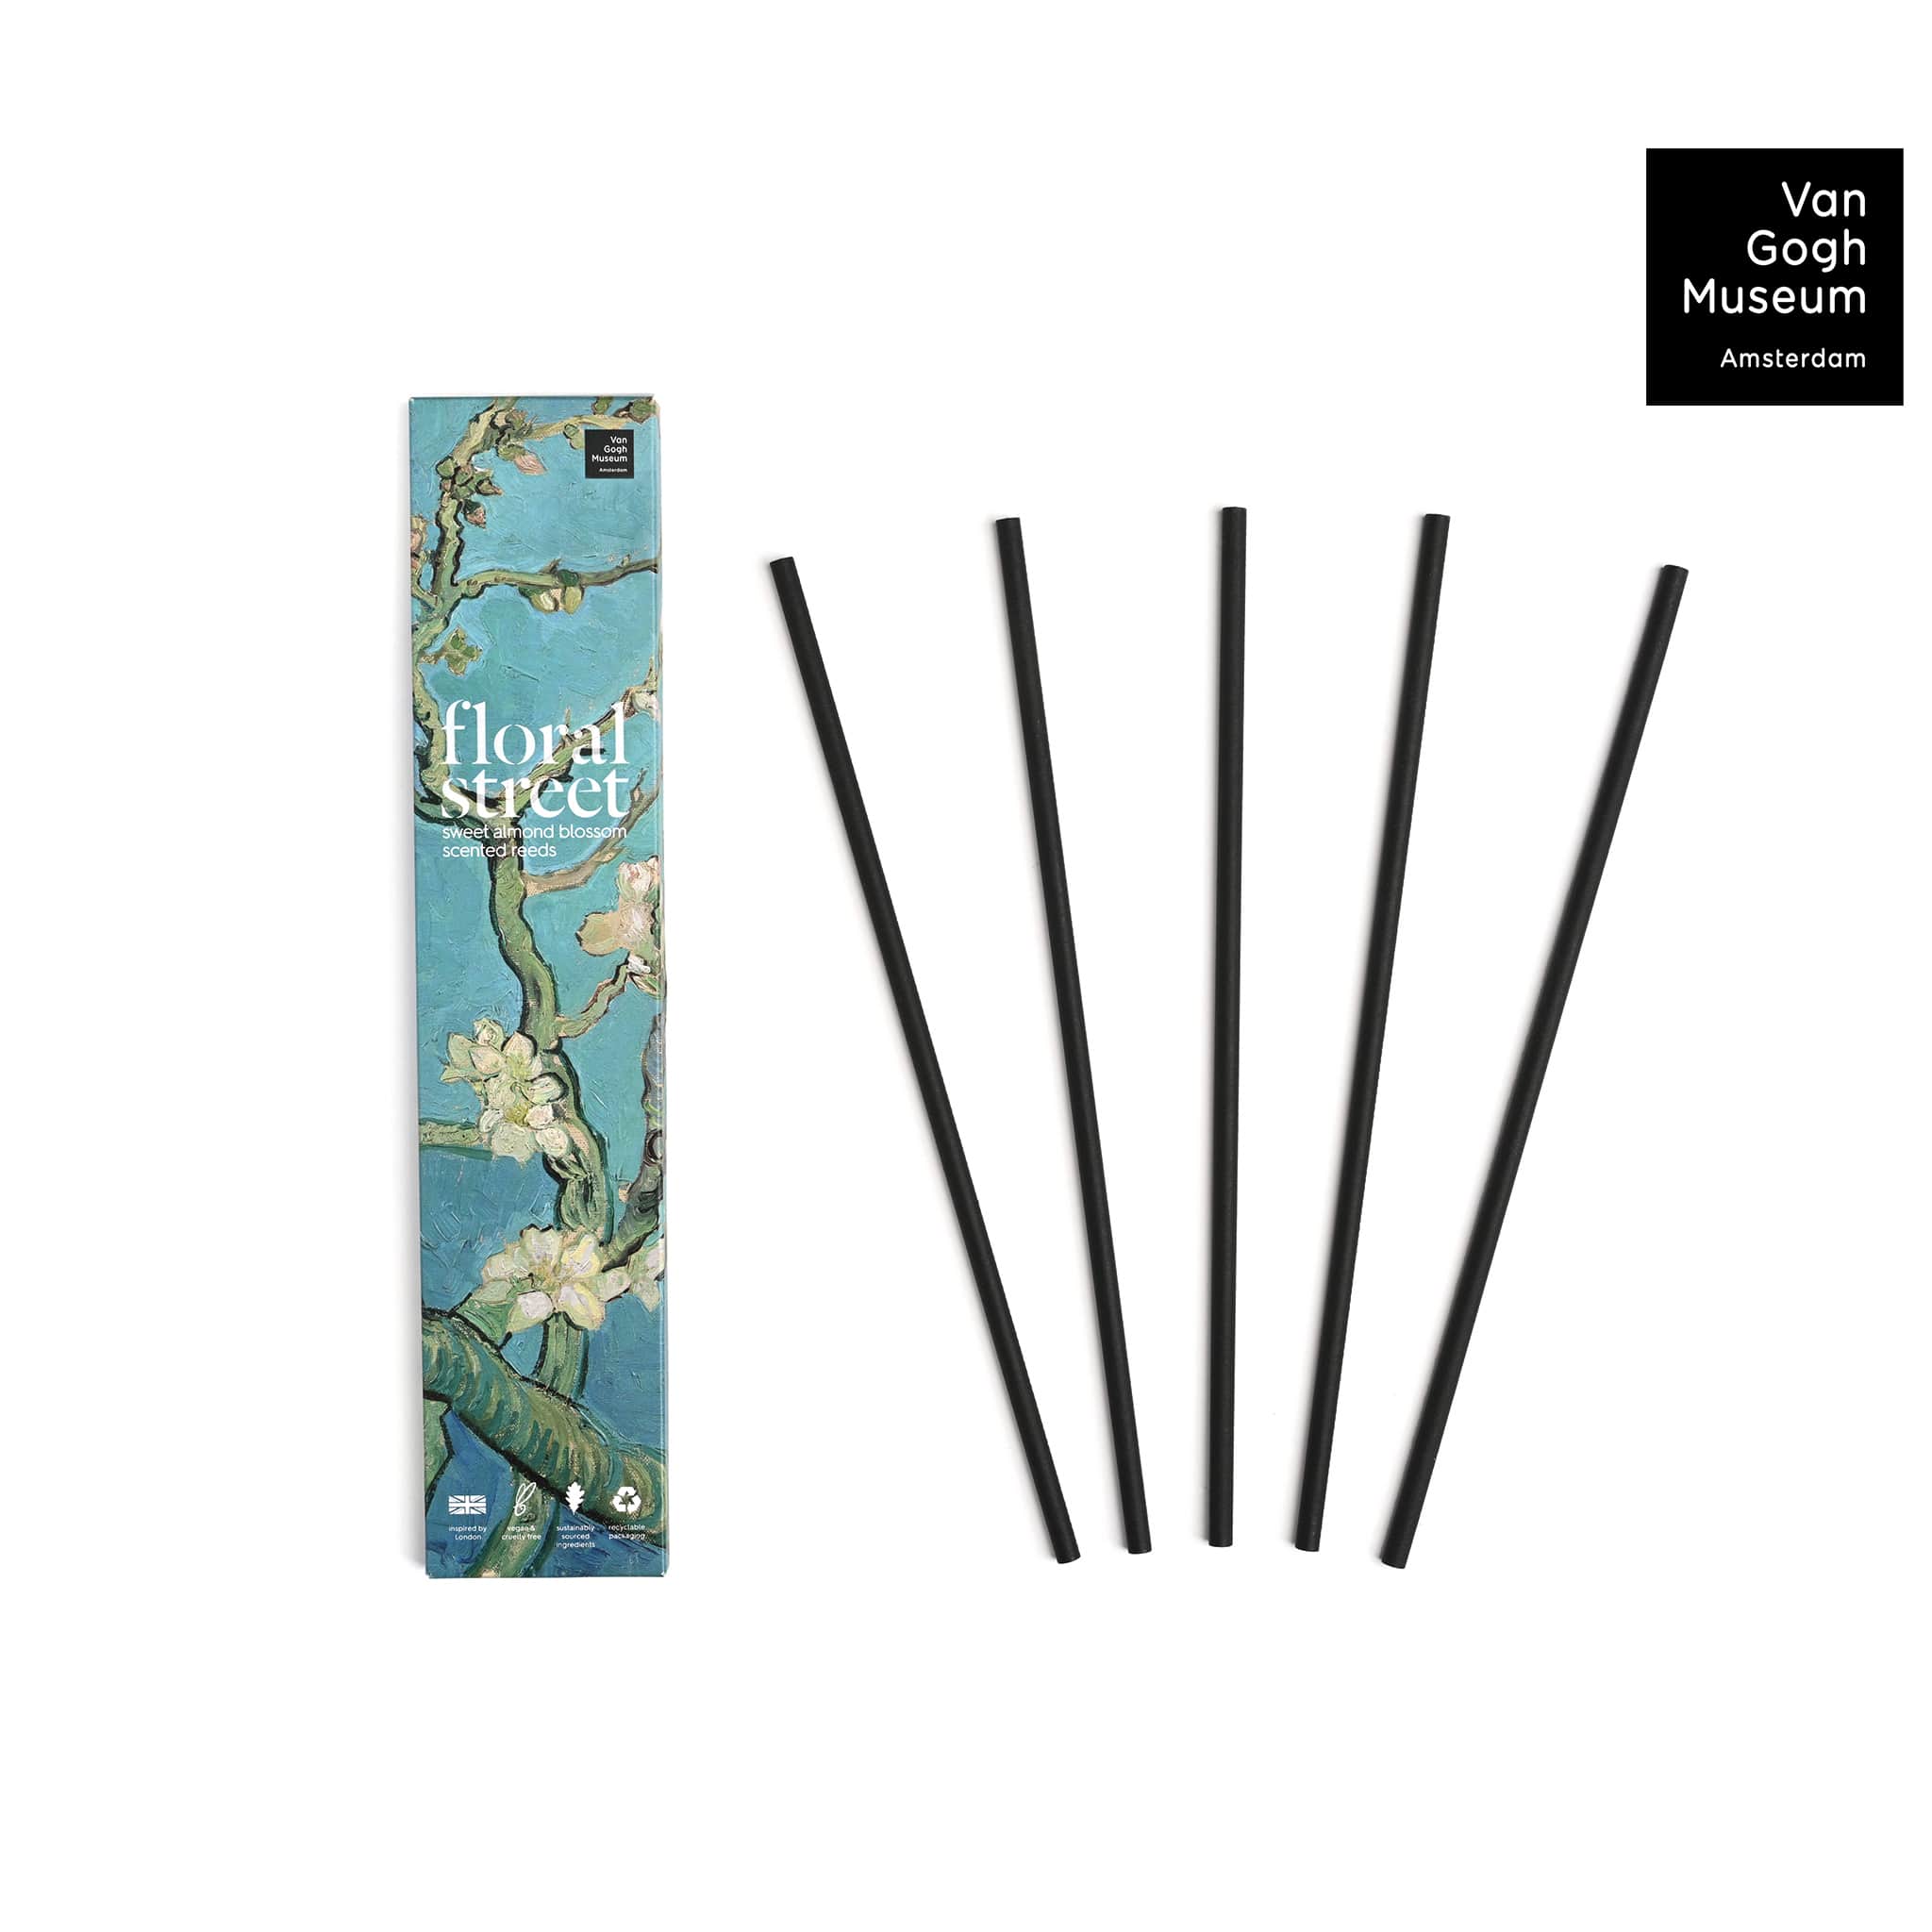 Sweet_Almond_Blossom_Scented_Reeds_2048x2048-min.jpg